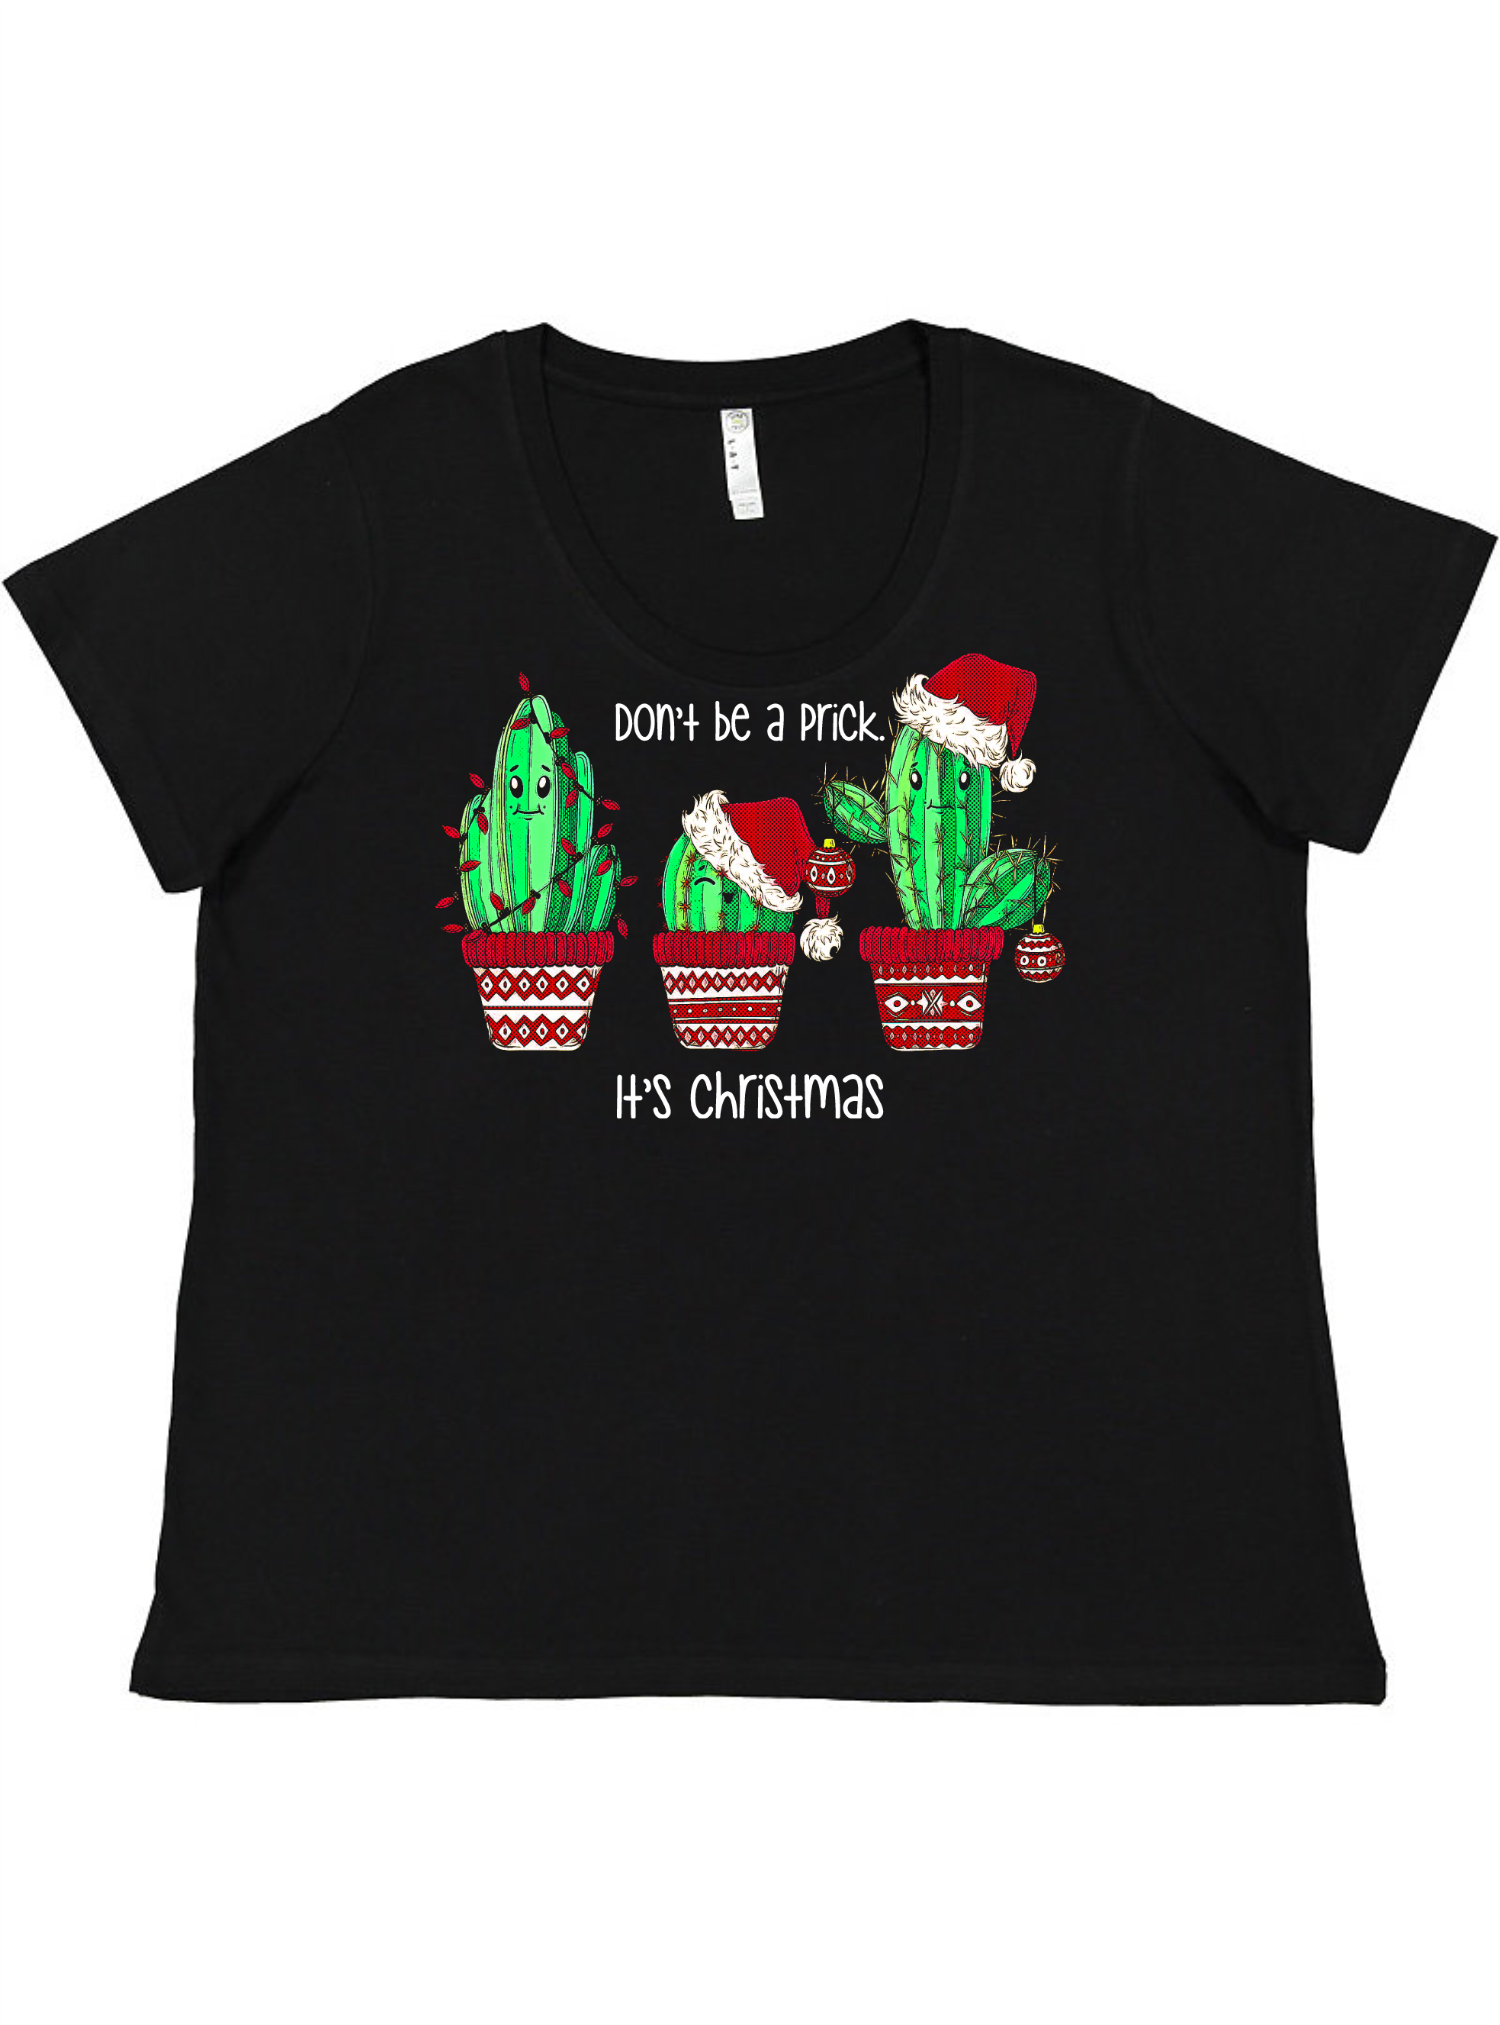 Don't be a Prick Ladies Tee Ladies Shirt by Akron Pride Custom Tees | Akron Pride Custom Tees